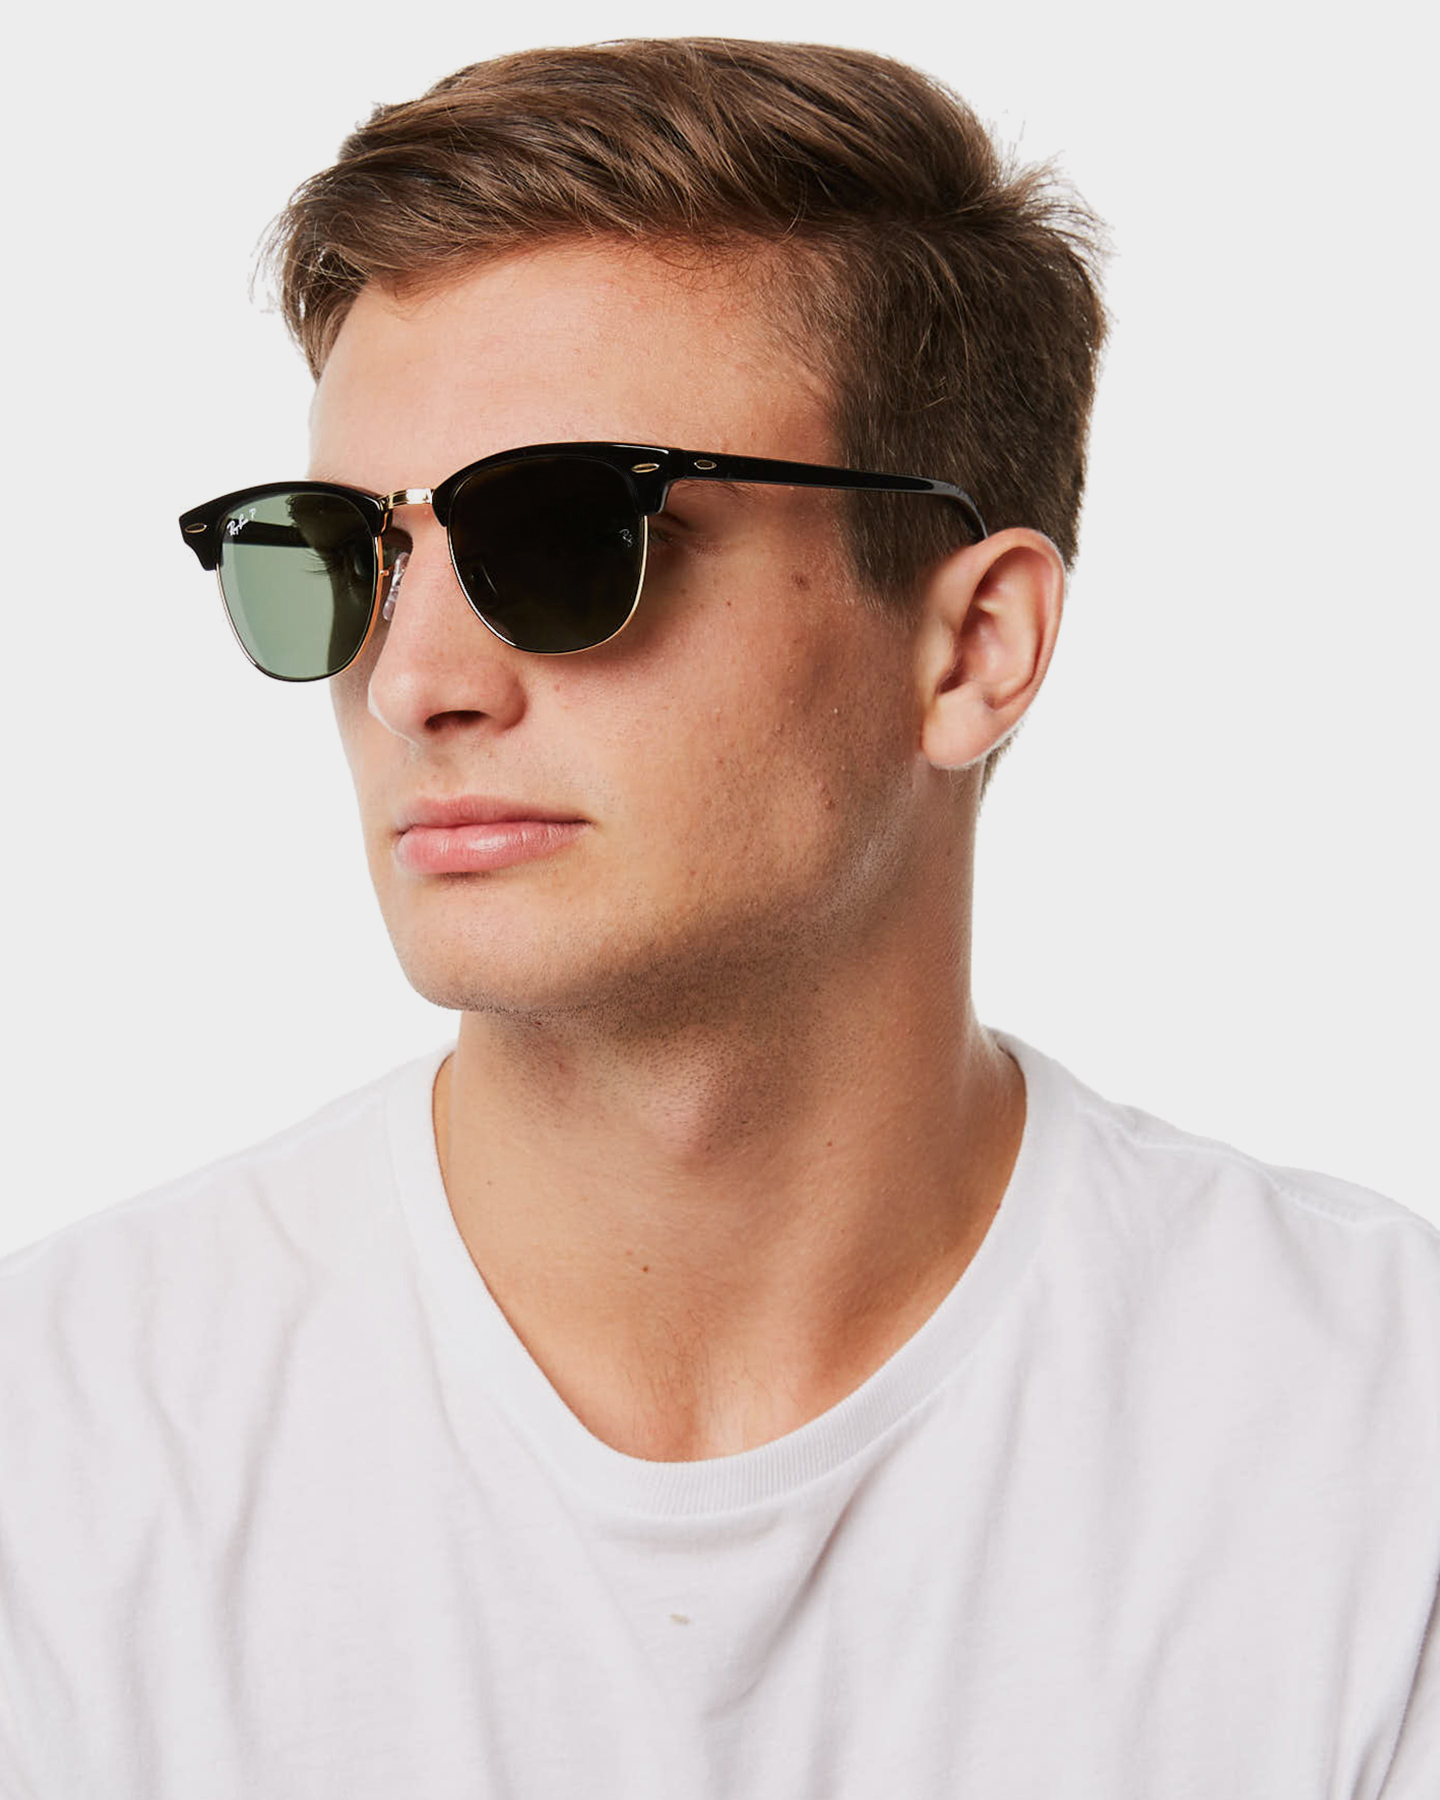 Classic Mens Ray Bans Shop Clothing Shoes Online